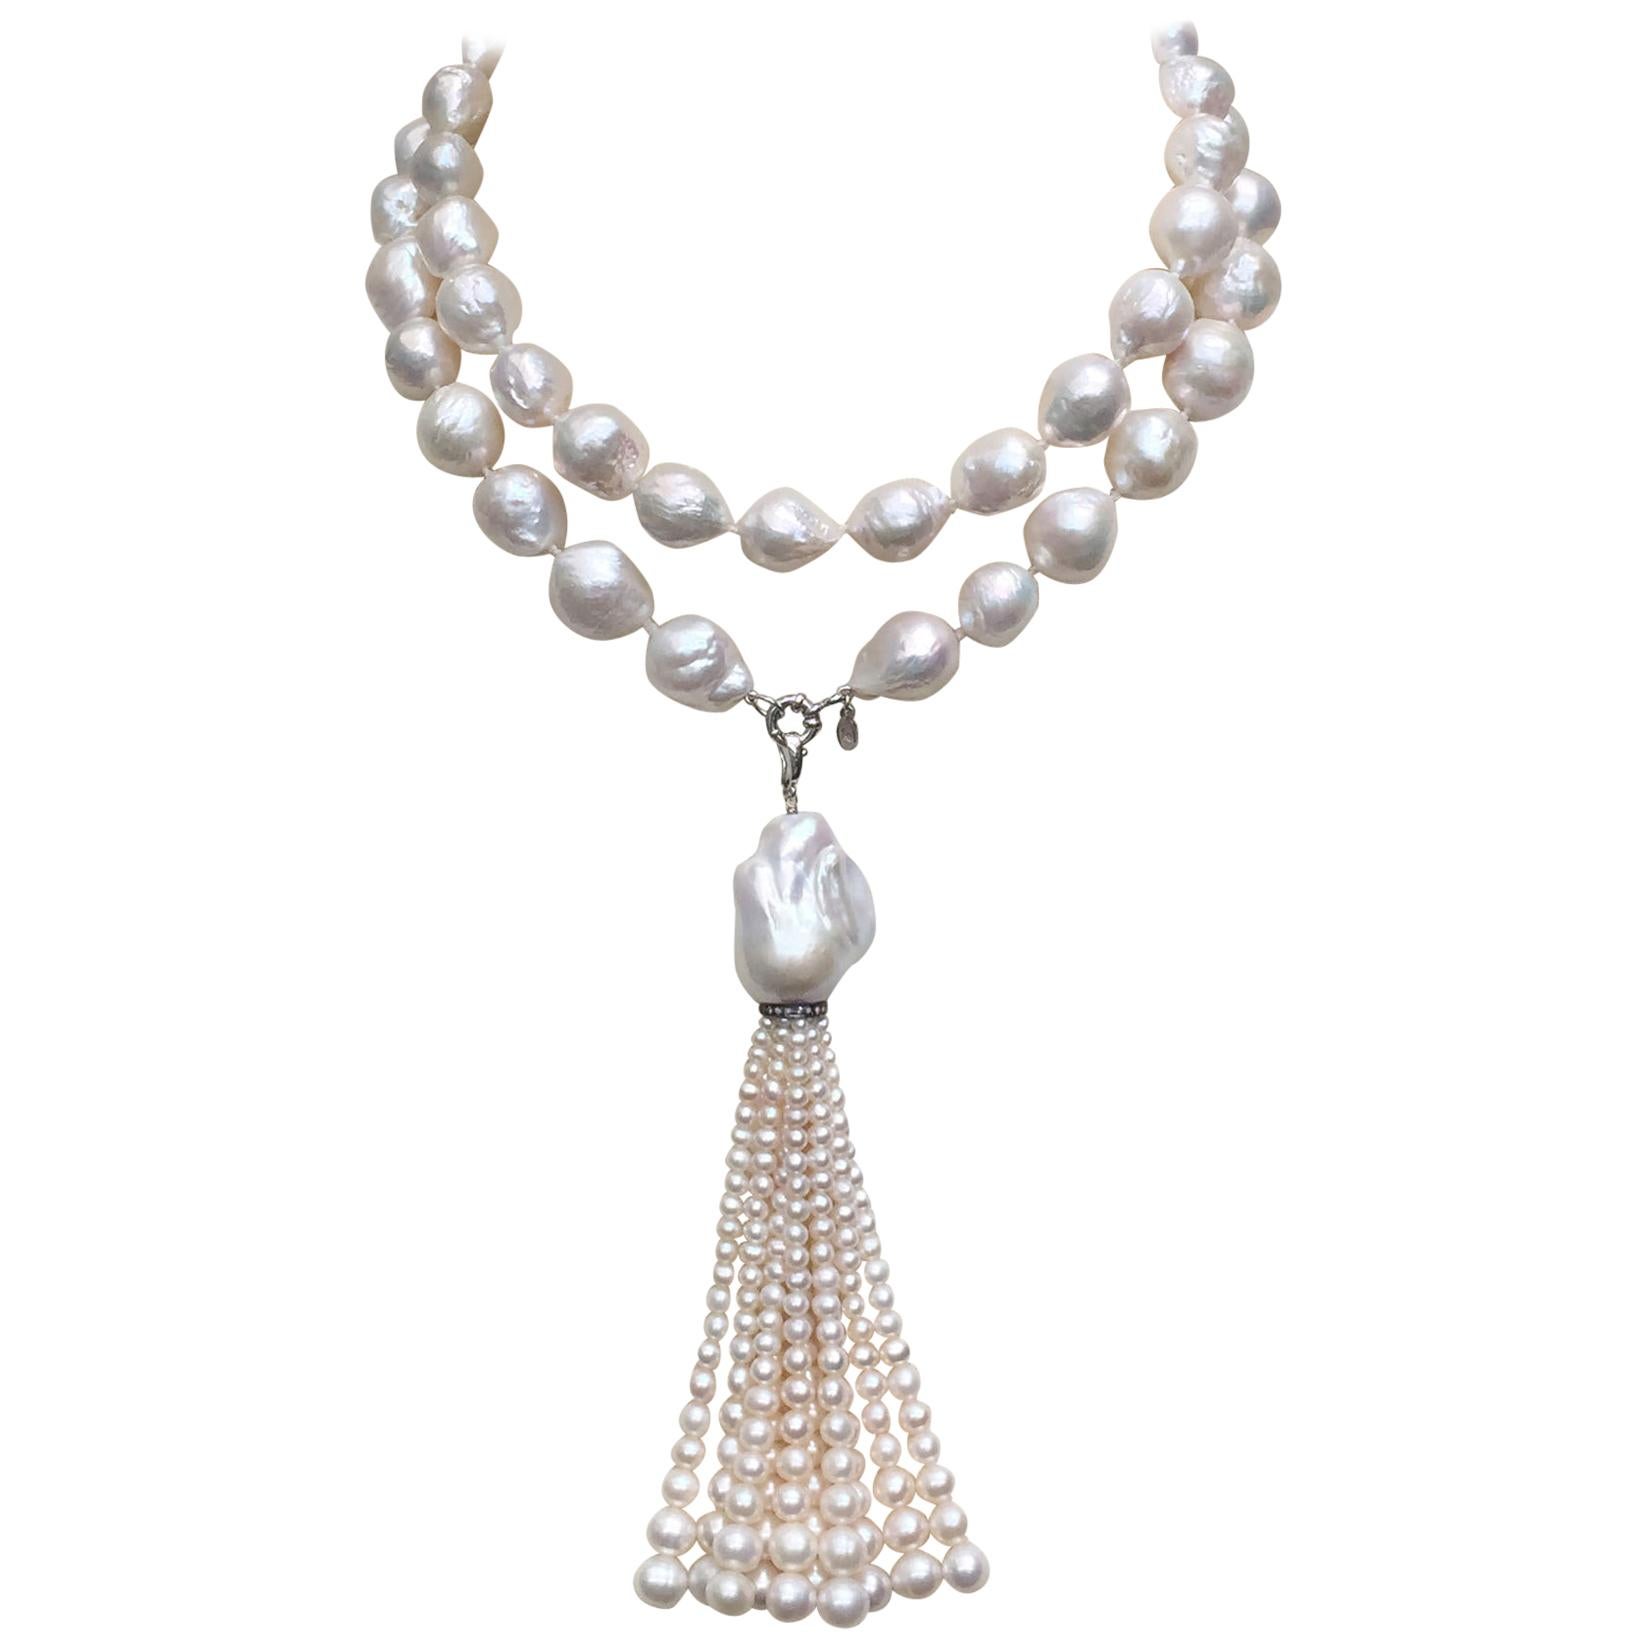 Large Pearl Necklace with Pearl and Diamond Tassel and 14 Karat White Gold Clasp